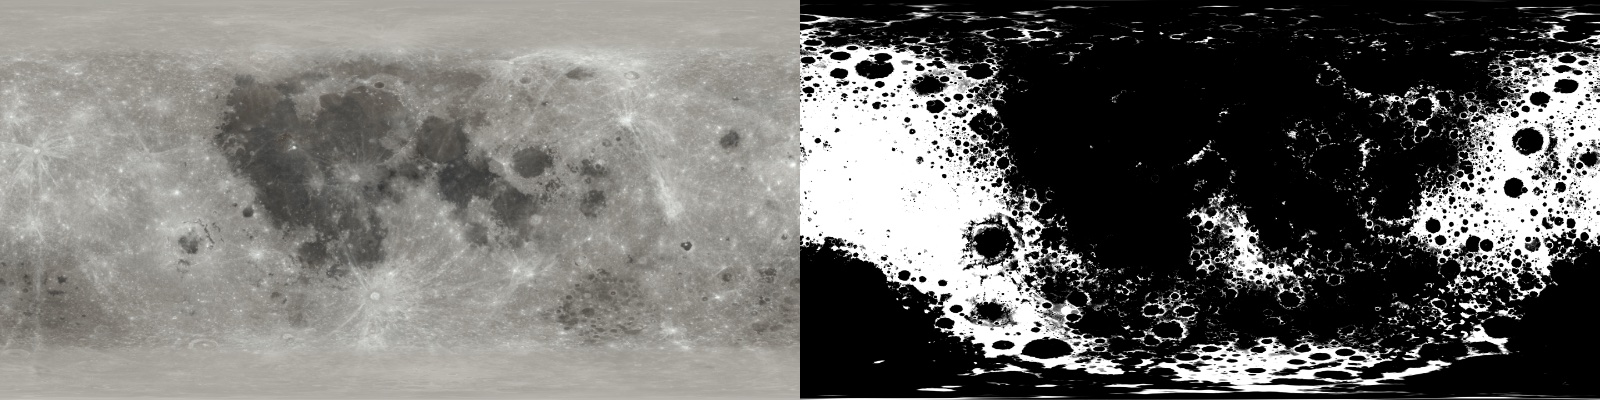 Moon textures, part of the CGI Moon Kit from NASA's Scientific Visualization Studio